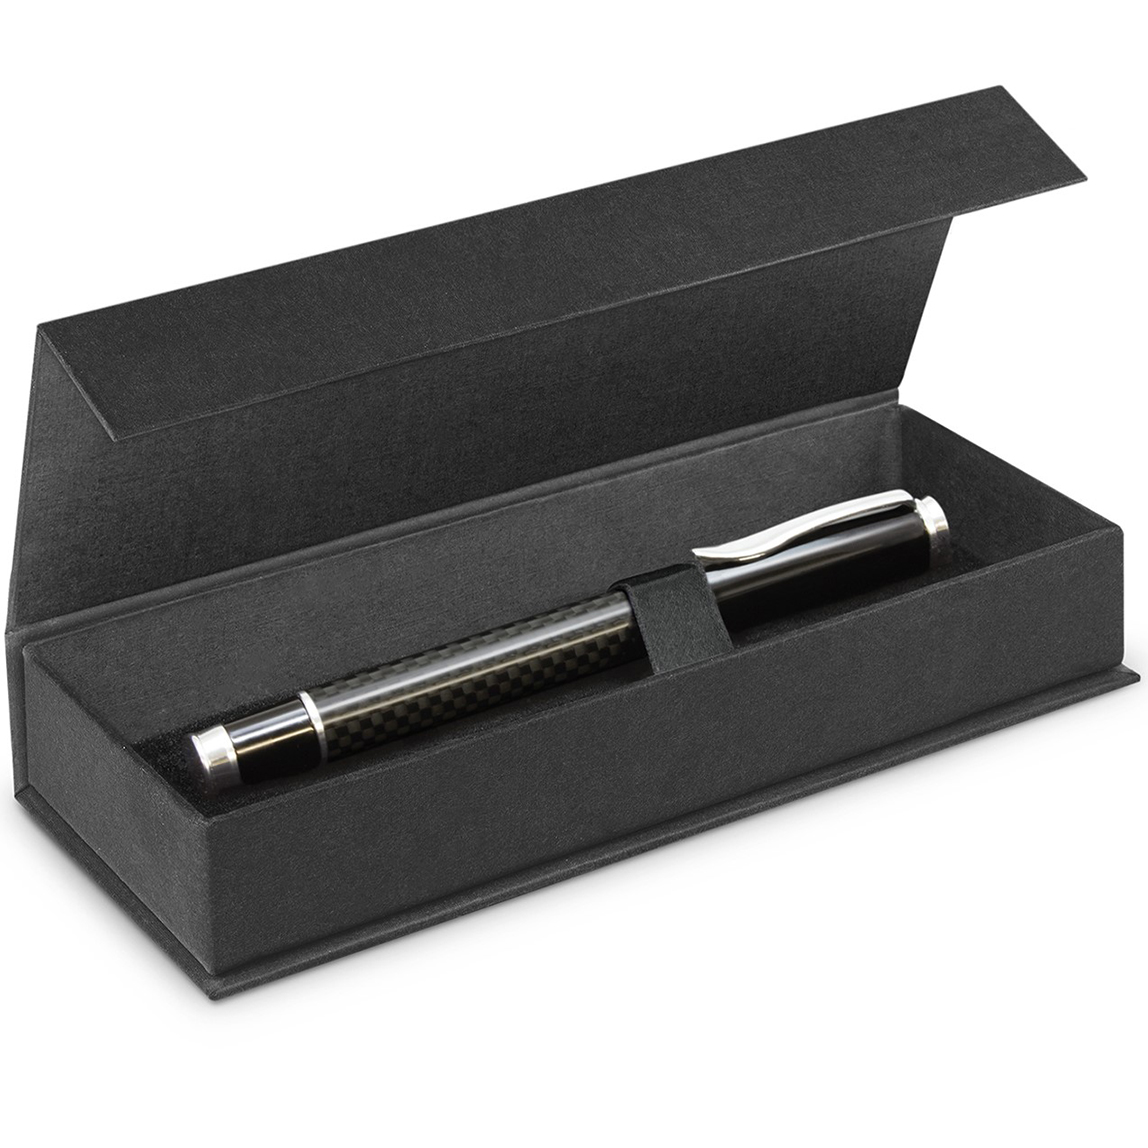 Statesman Rolling Ball Pen Features